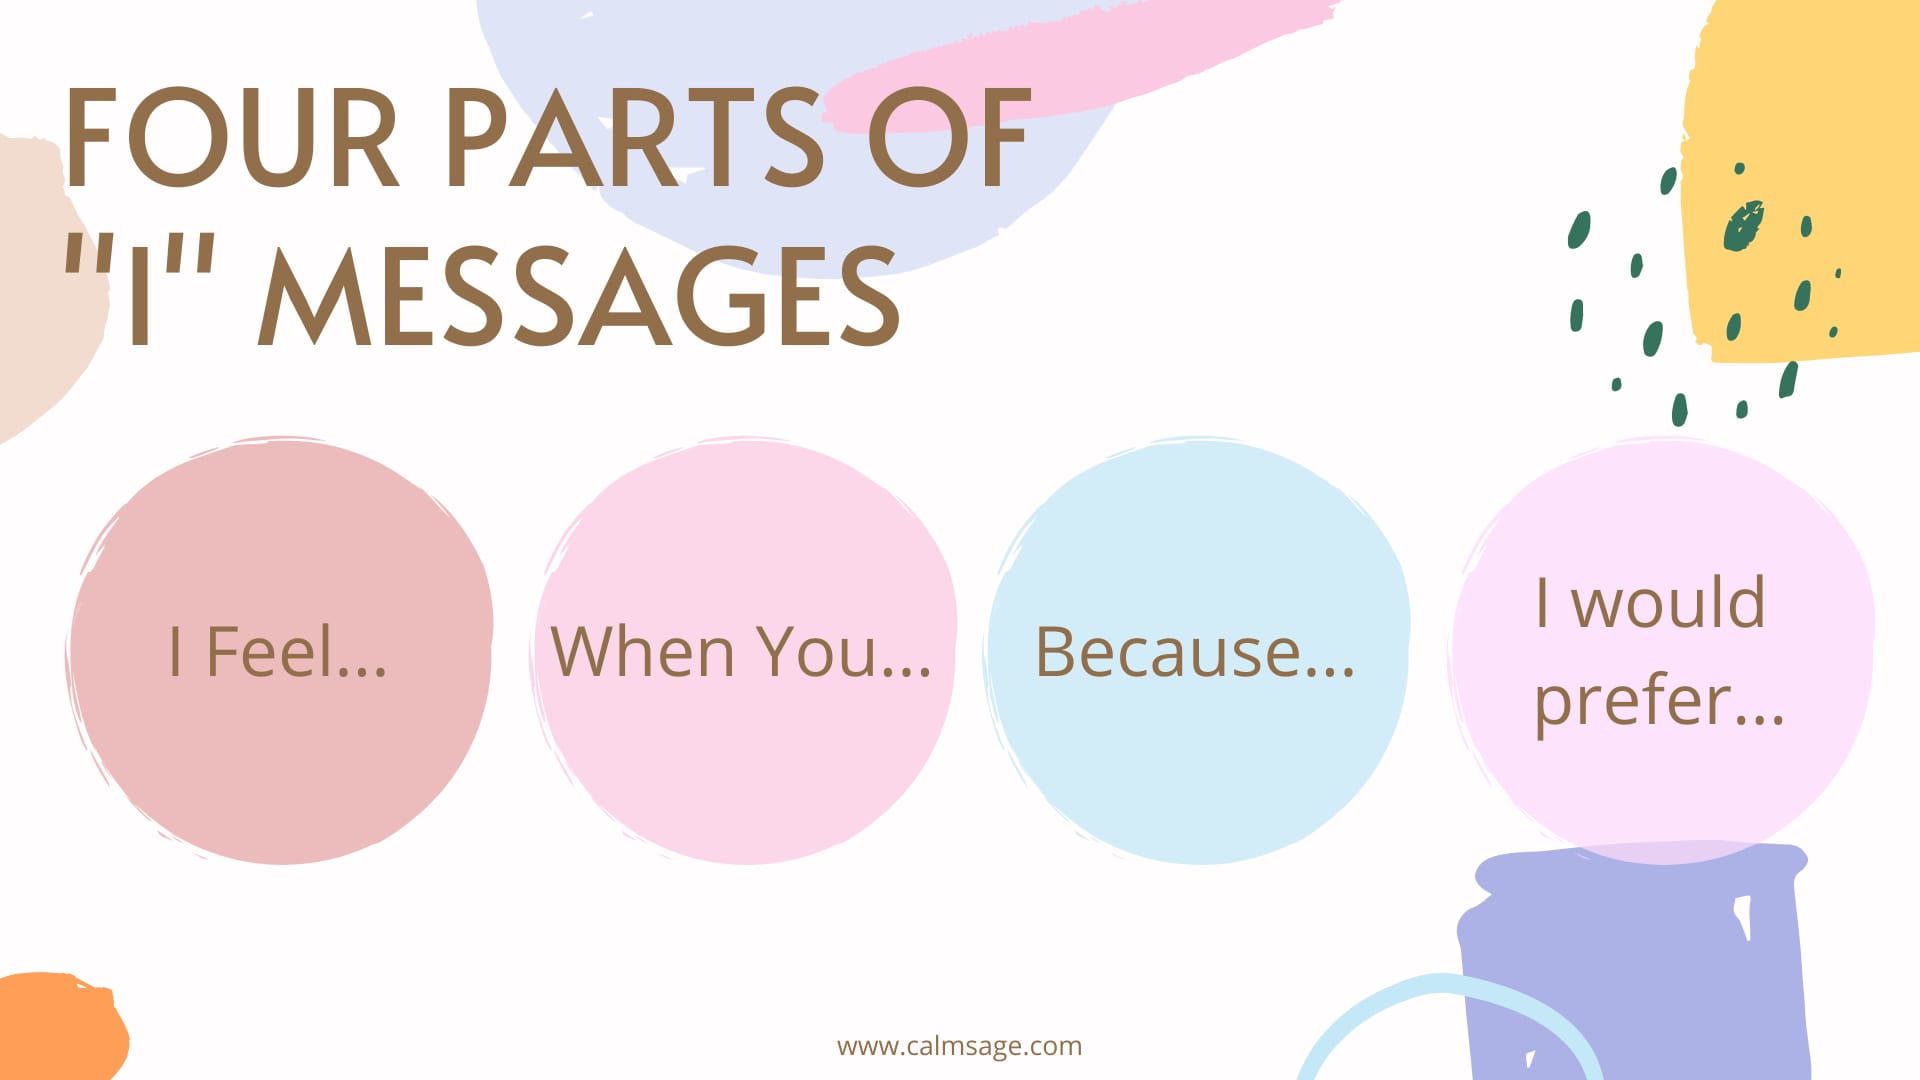 Four Parts of an “I” Message